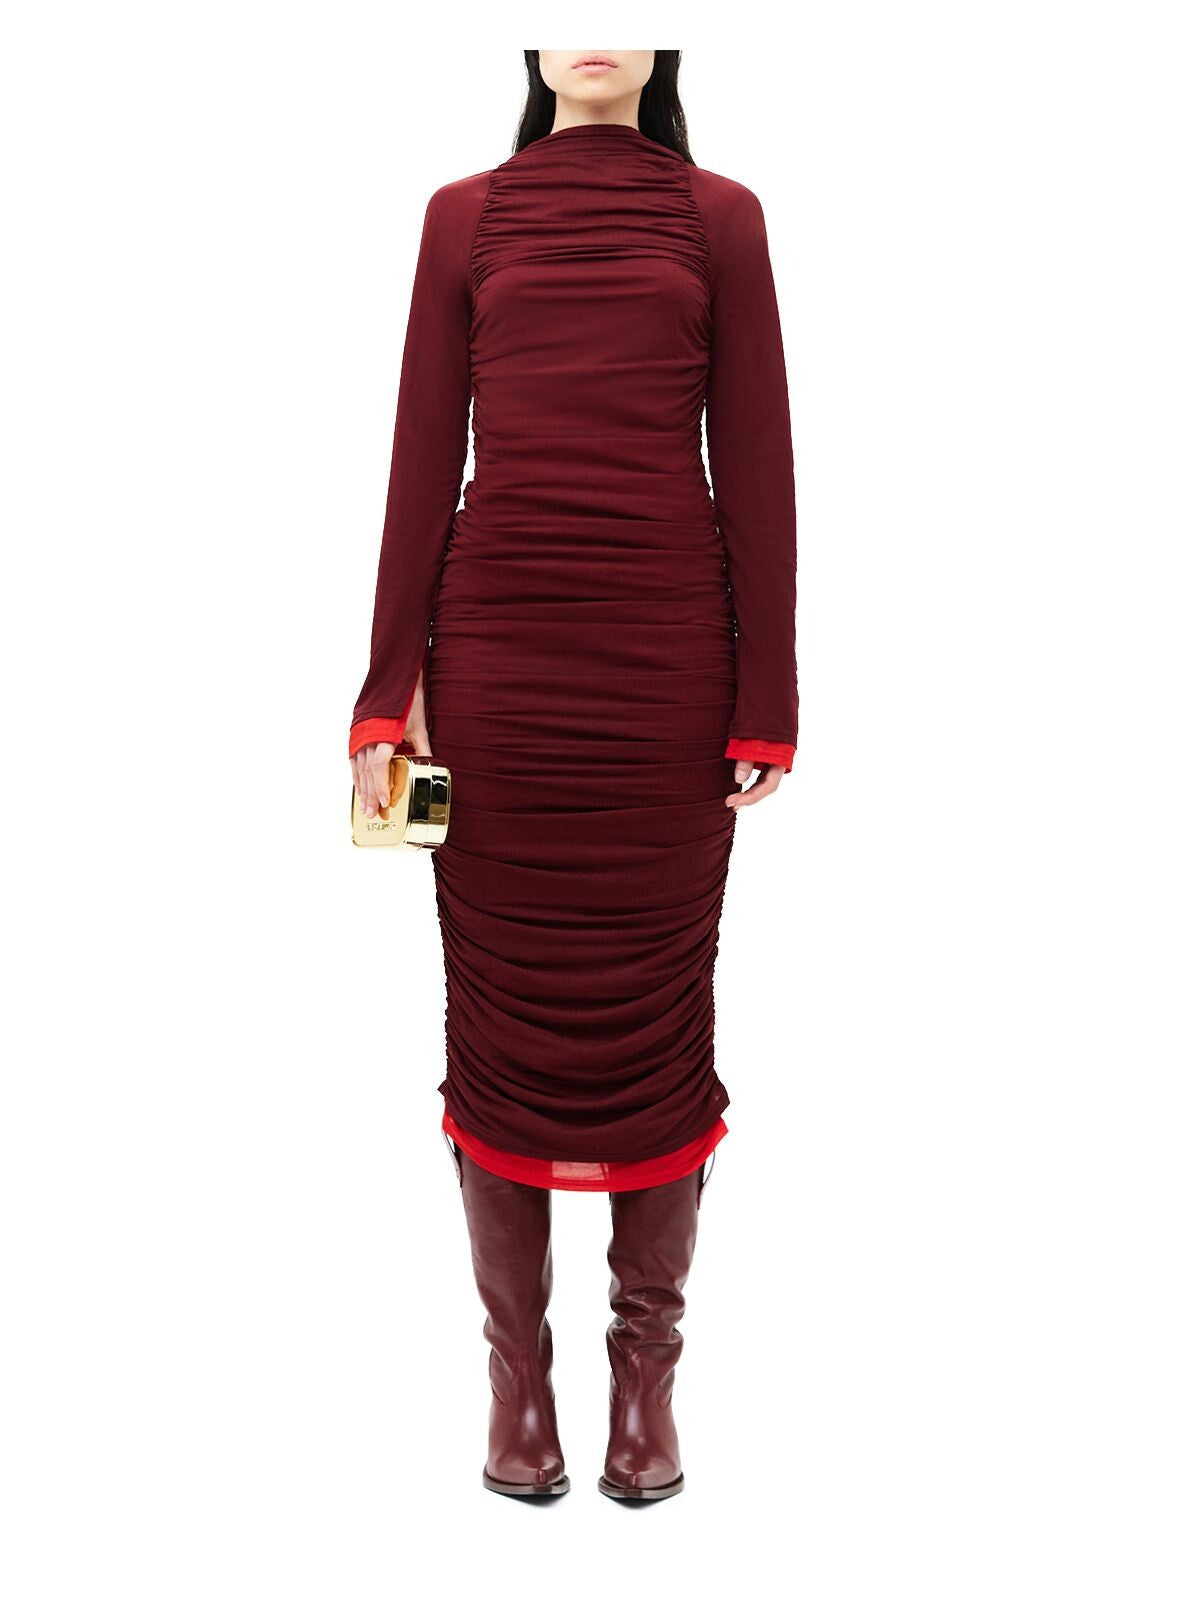 MESH SIMON MILLER Womens Burgundy Ruched Pullover Lined Color Block Long Sleeve Mock Neck Midi Cocktail Body Con Dress XS